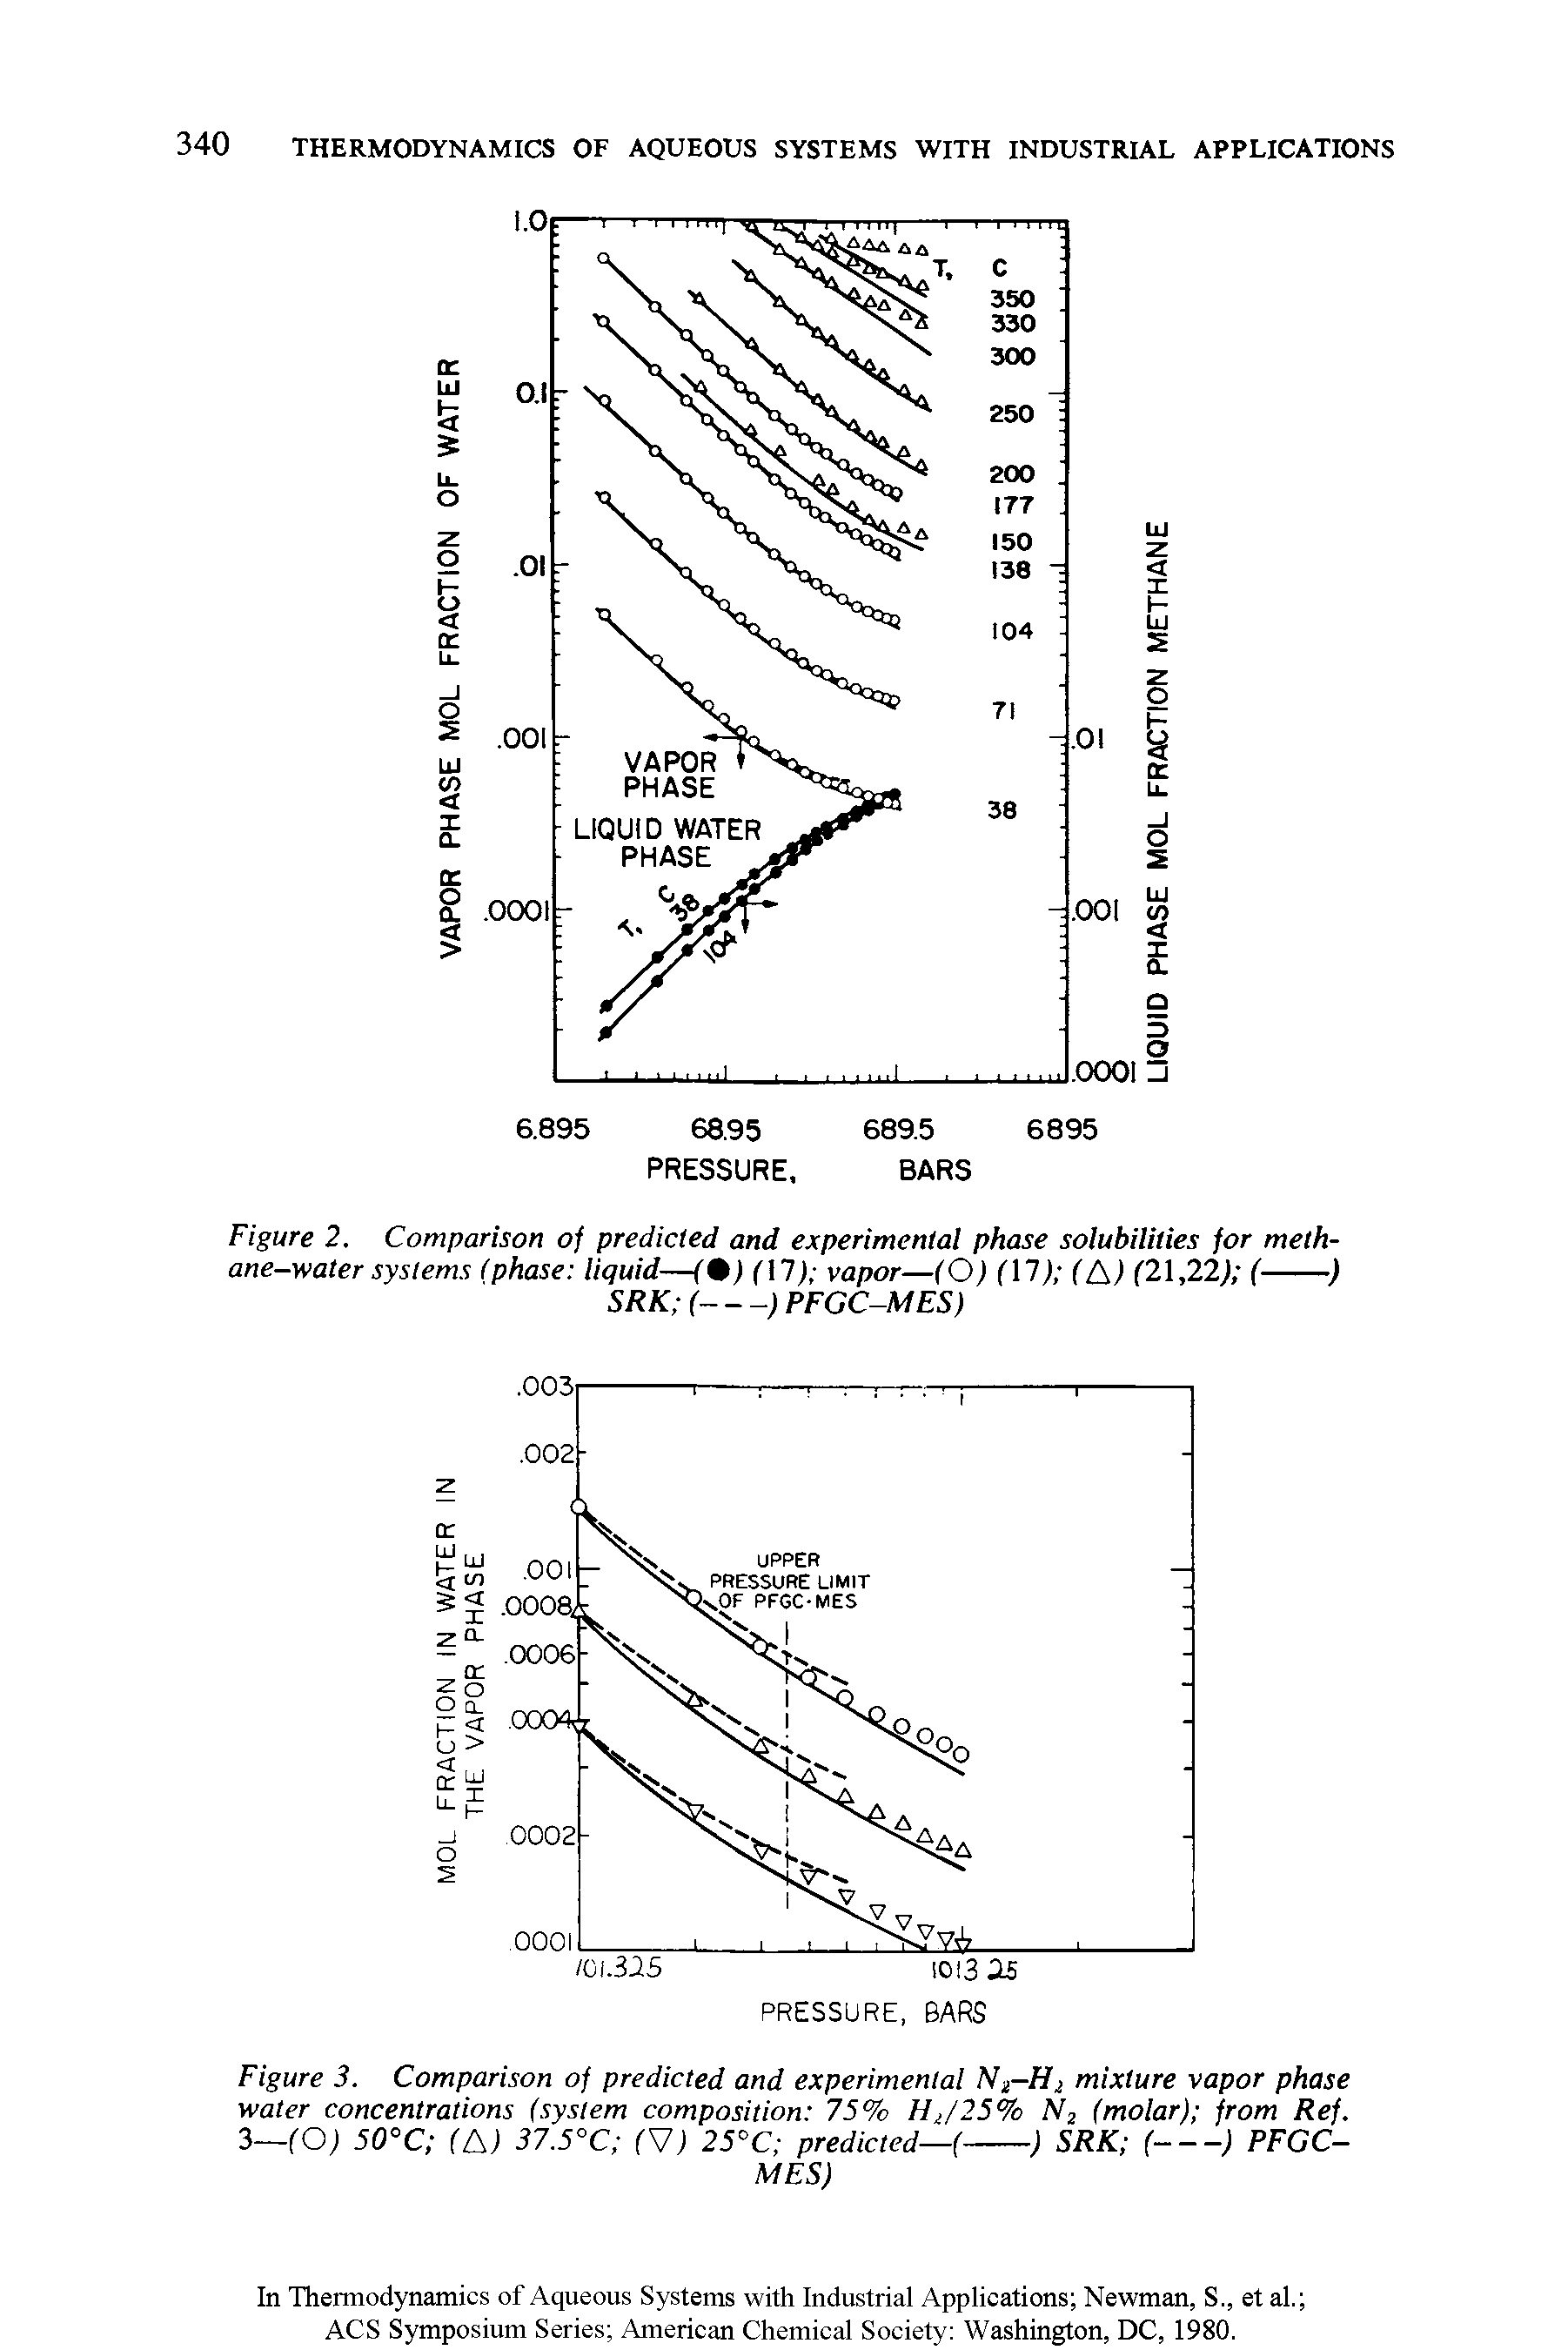 Figure 2. Comparison of predicted and experimental phase solubilities for methane-water systems (phase liquid—(%) ( 7) vapor—(O) ( 1) (A) (21,22) (-)...